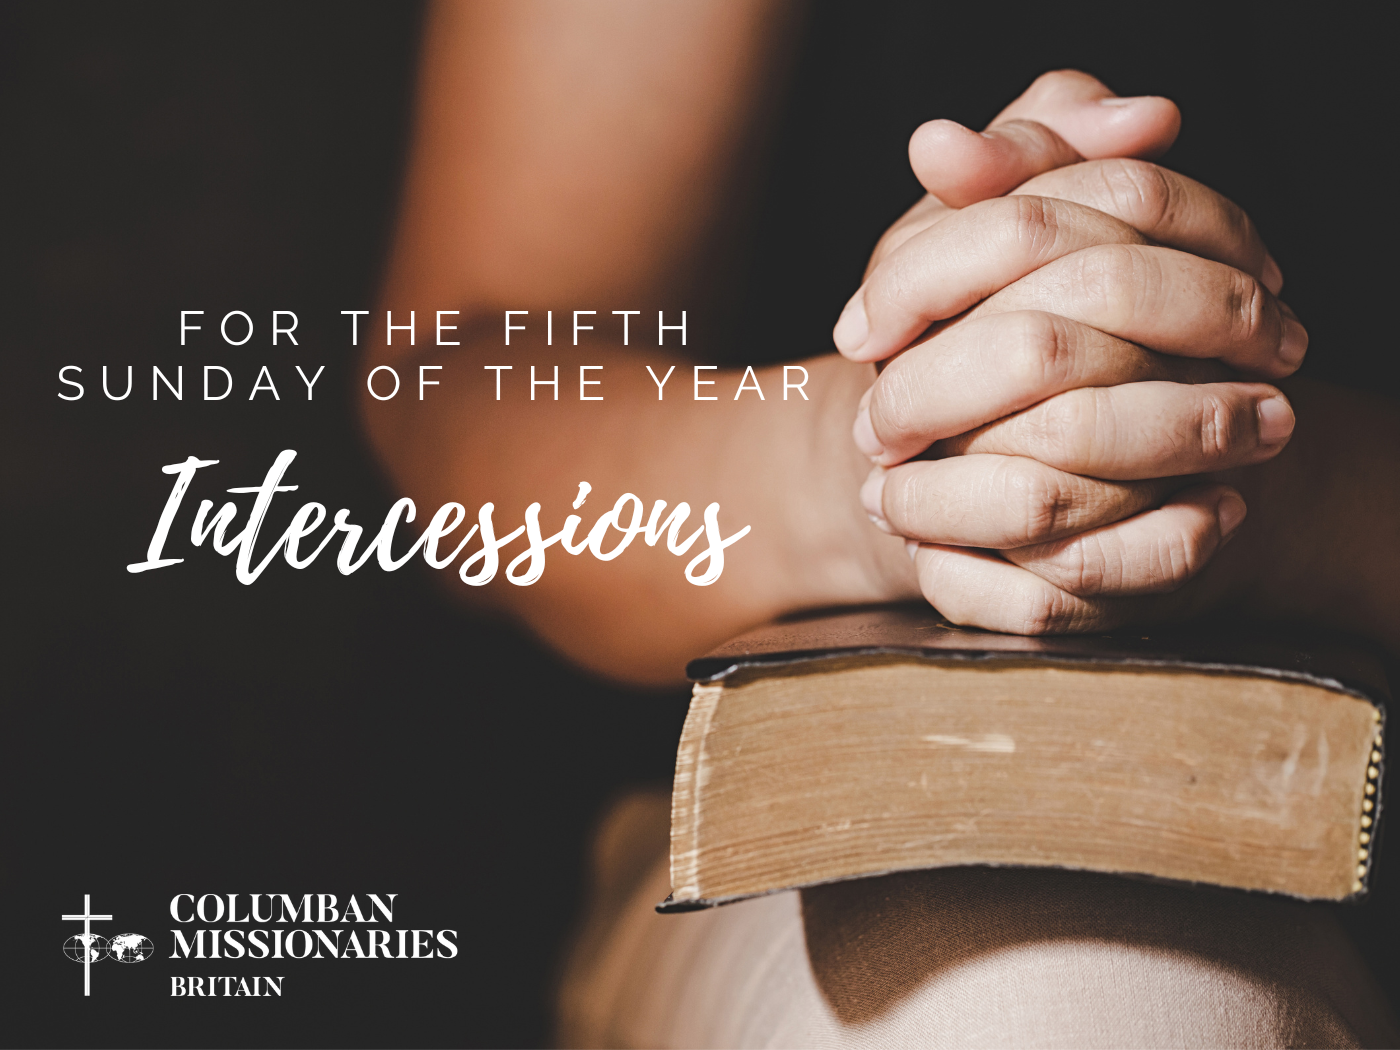 Download prayers of intercession for the 5th Sunday of the Year